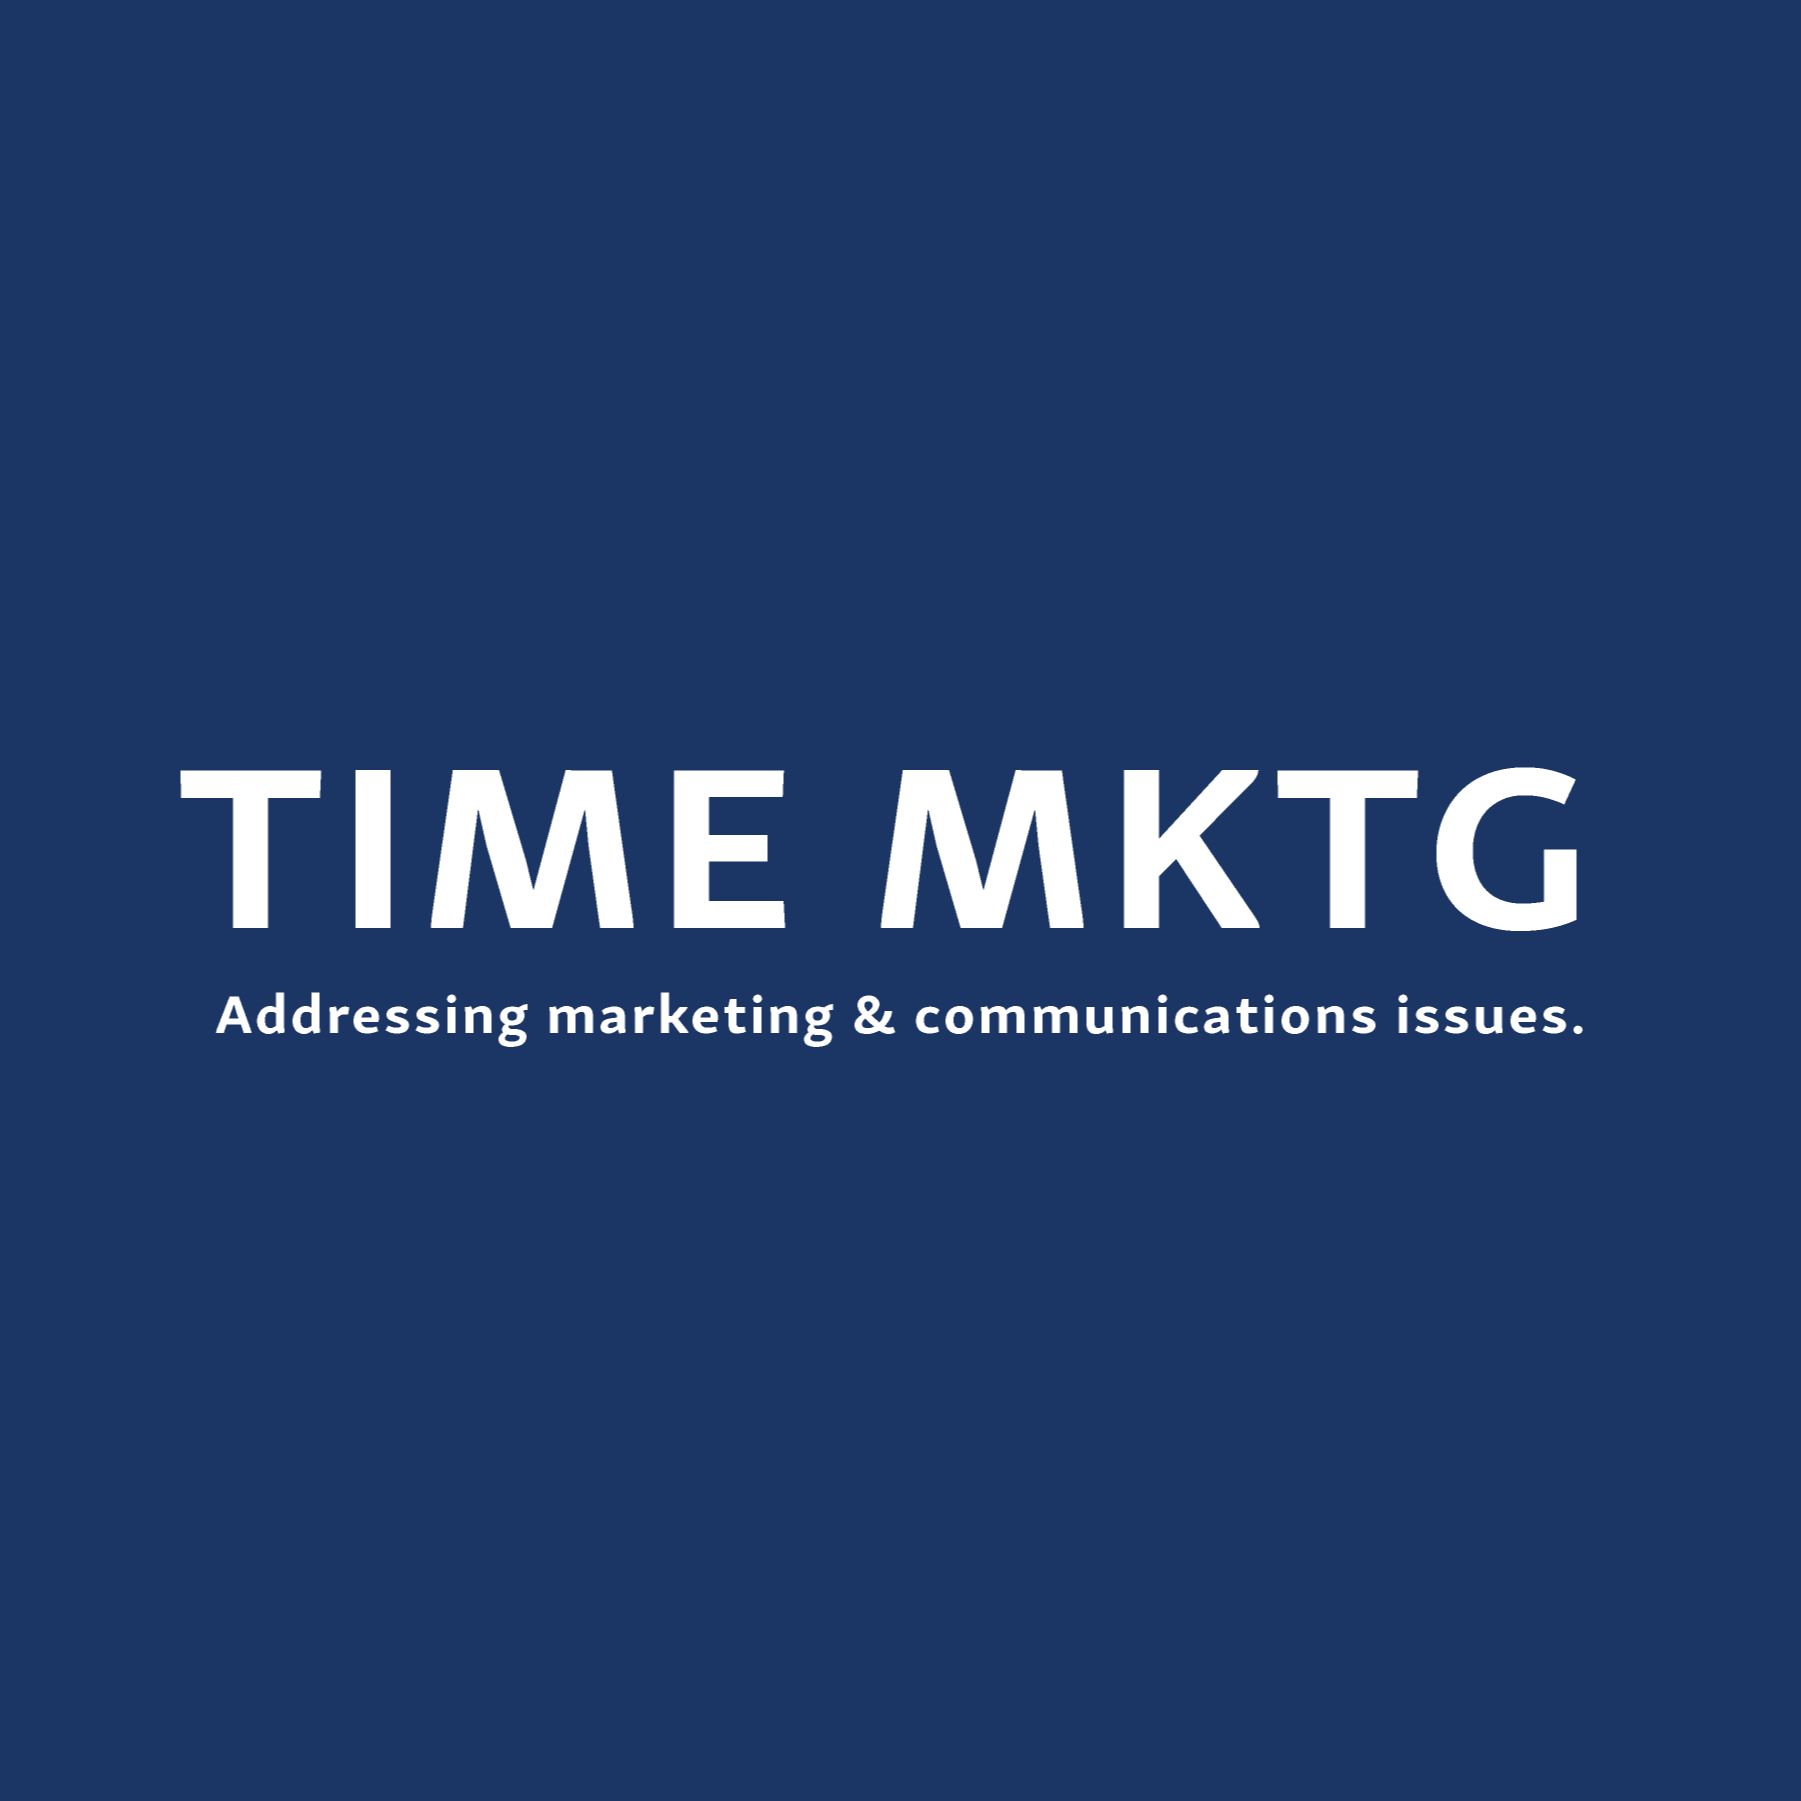 Time Mktg - Addressing marketing and communication issues.